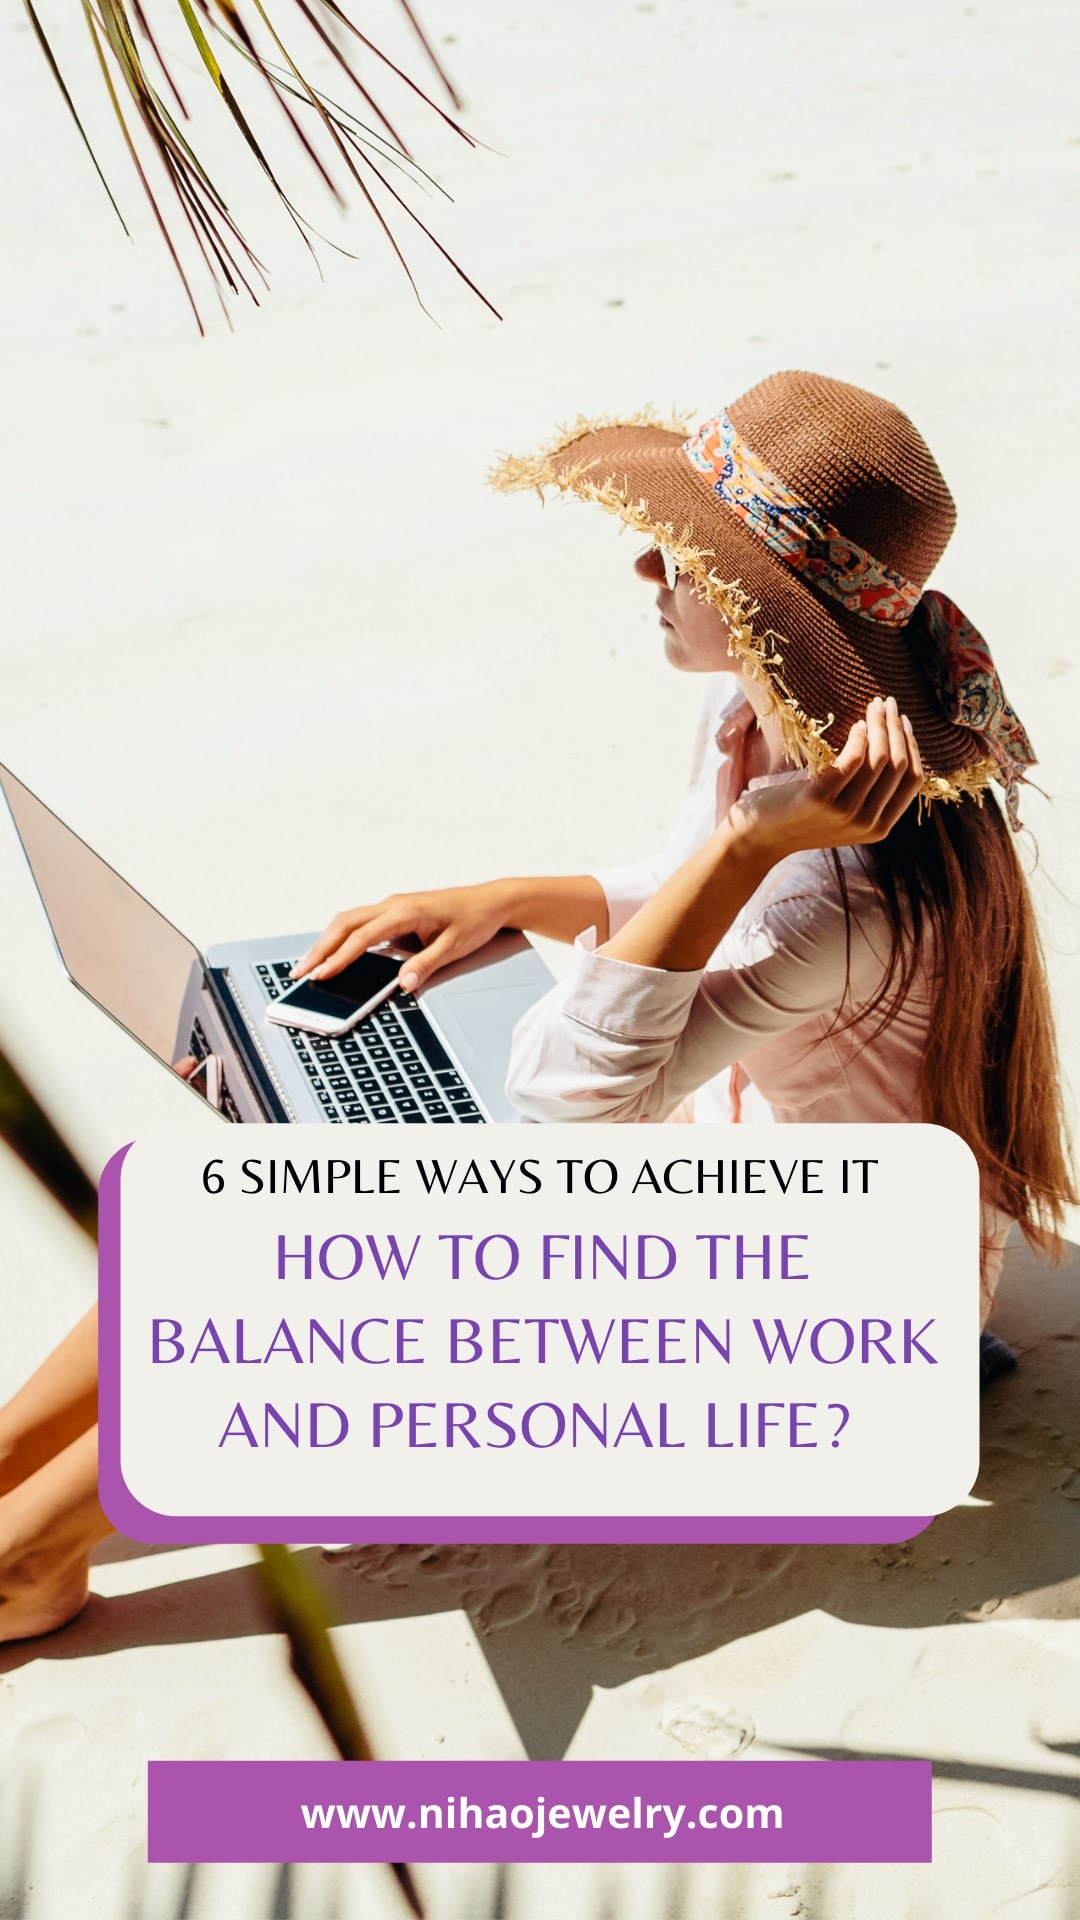 6 ways to achive balance between work and life